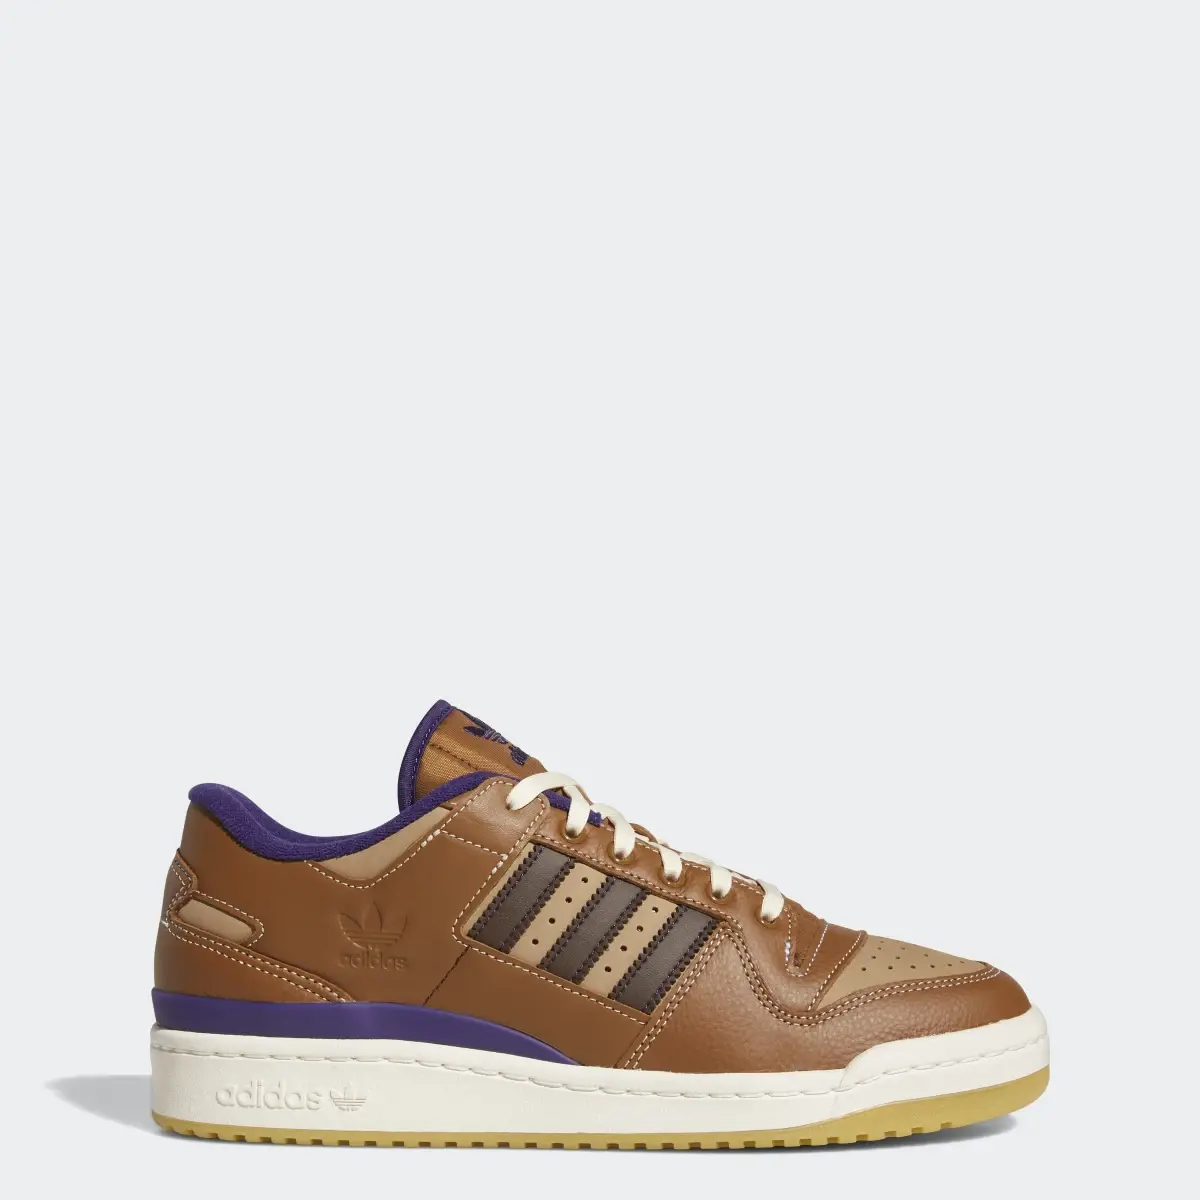 Adidas Heitor Forum 84 Low ADV Shoes. 1